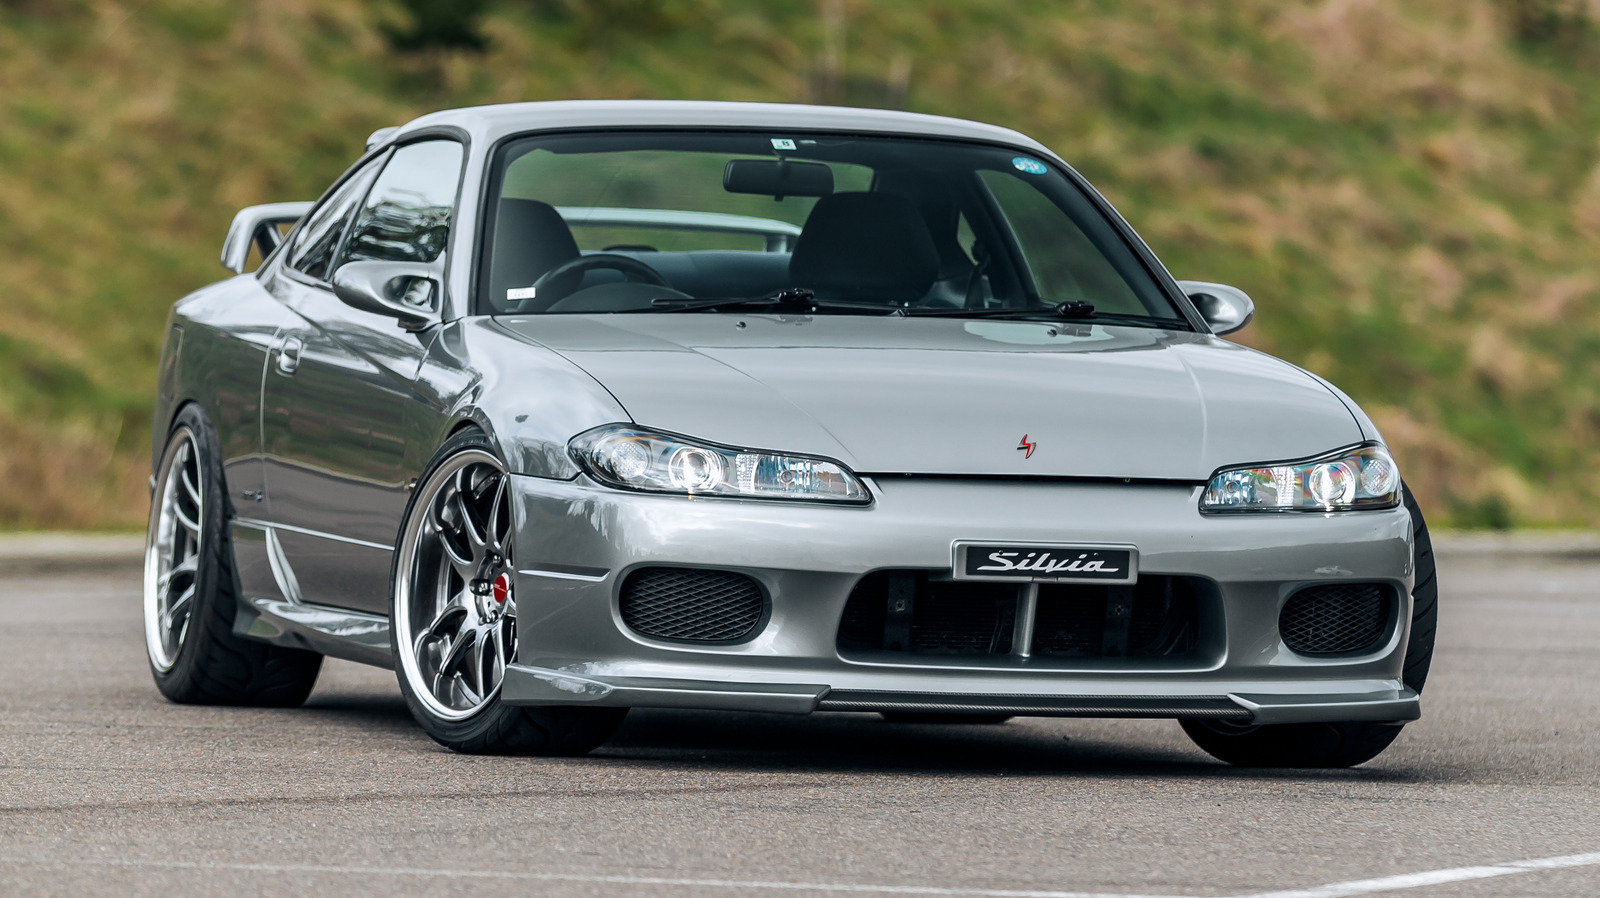 Every Generation Nissan Silvia Ranked Slowest To Fastest According